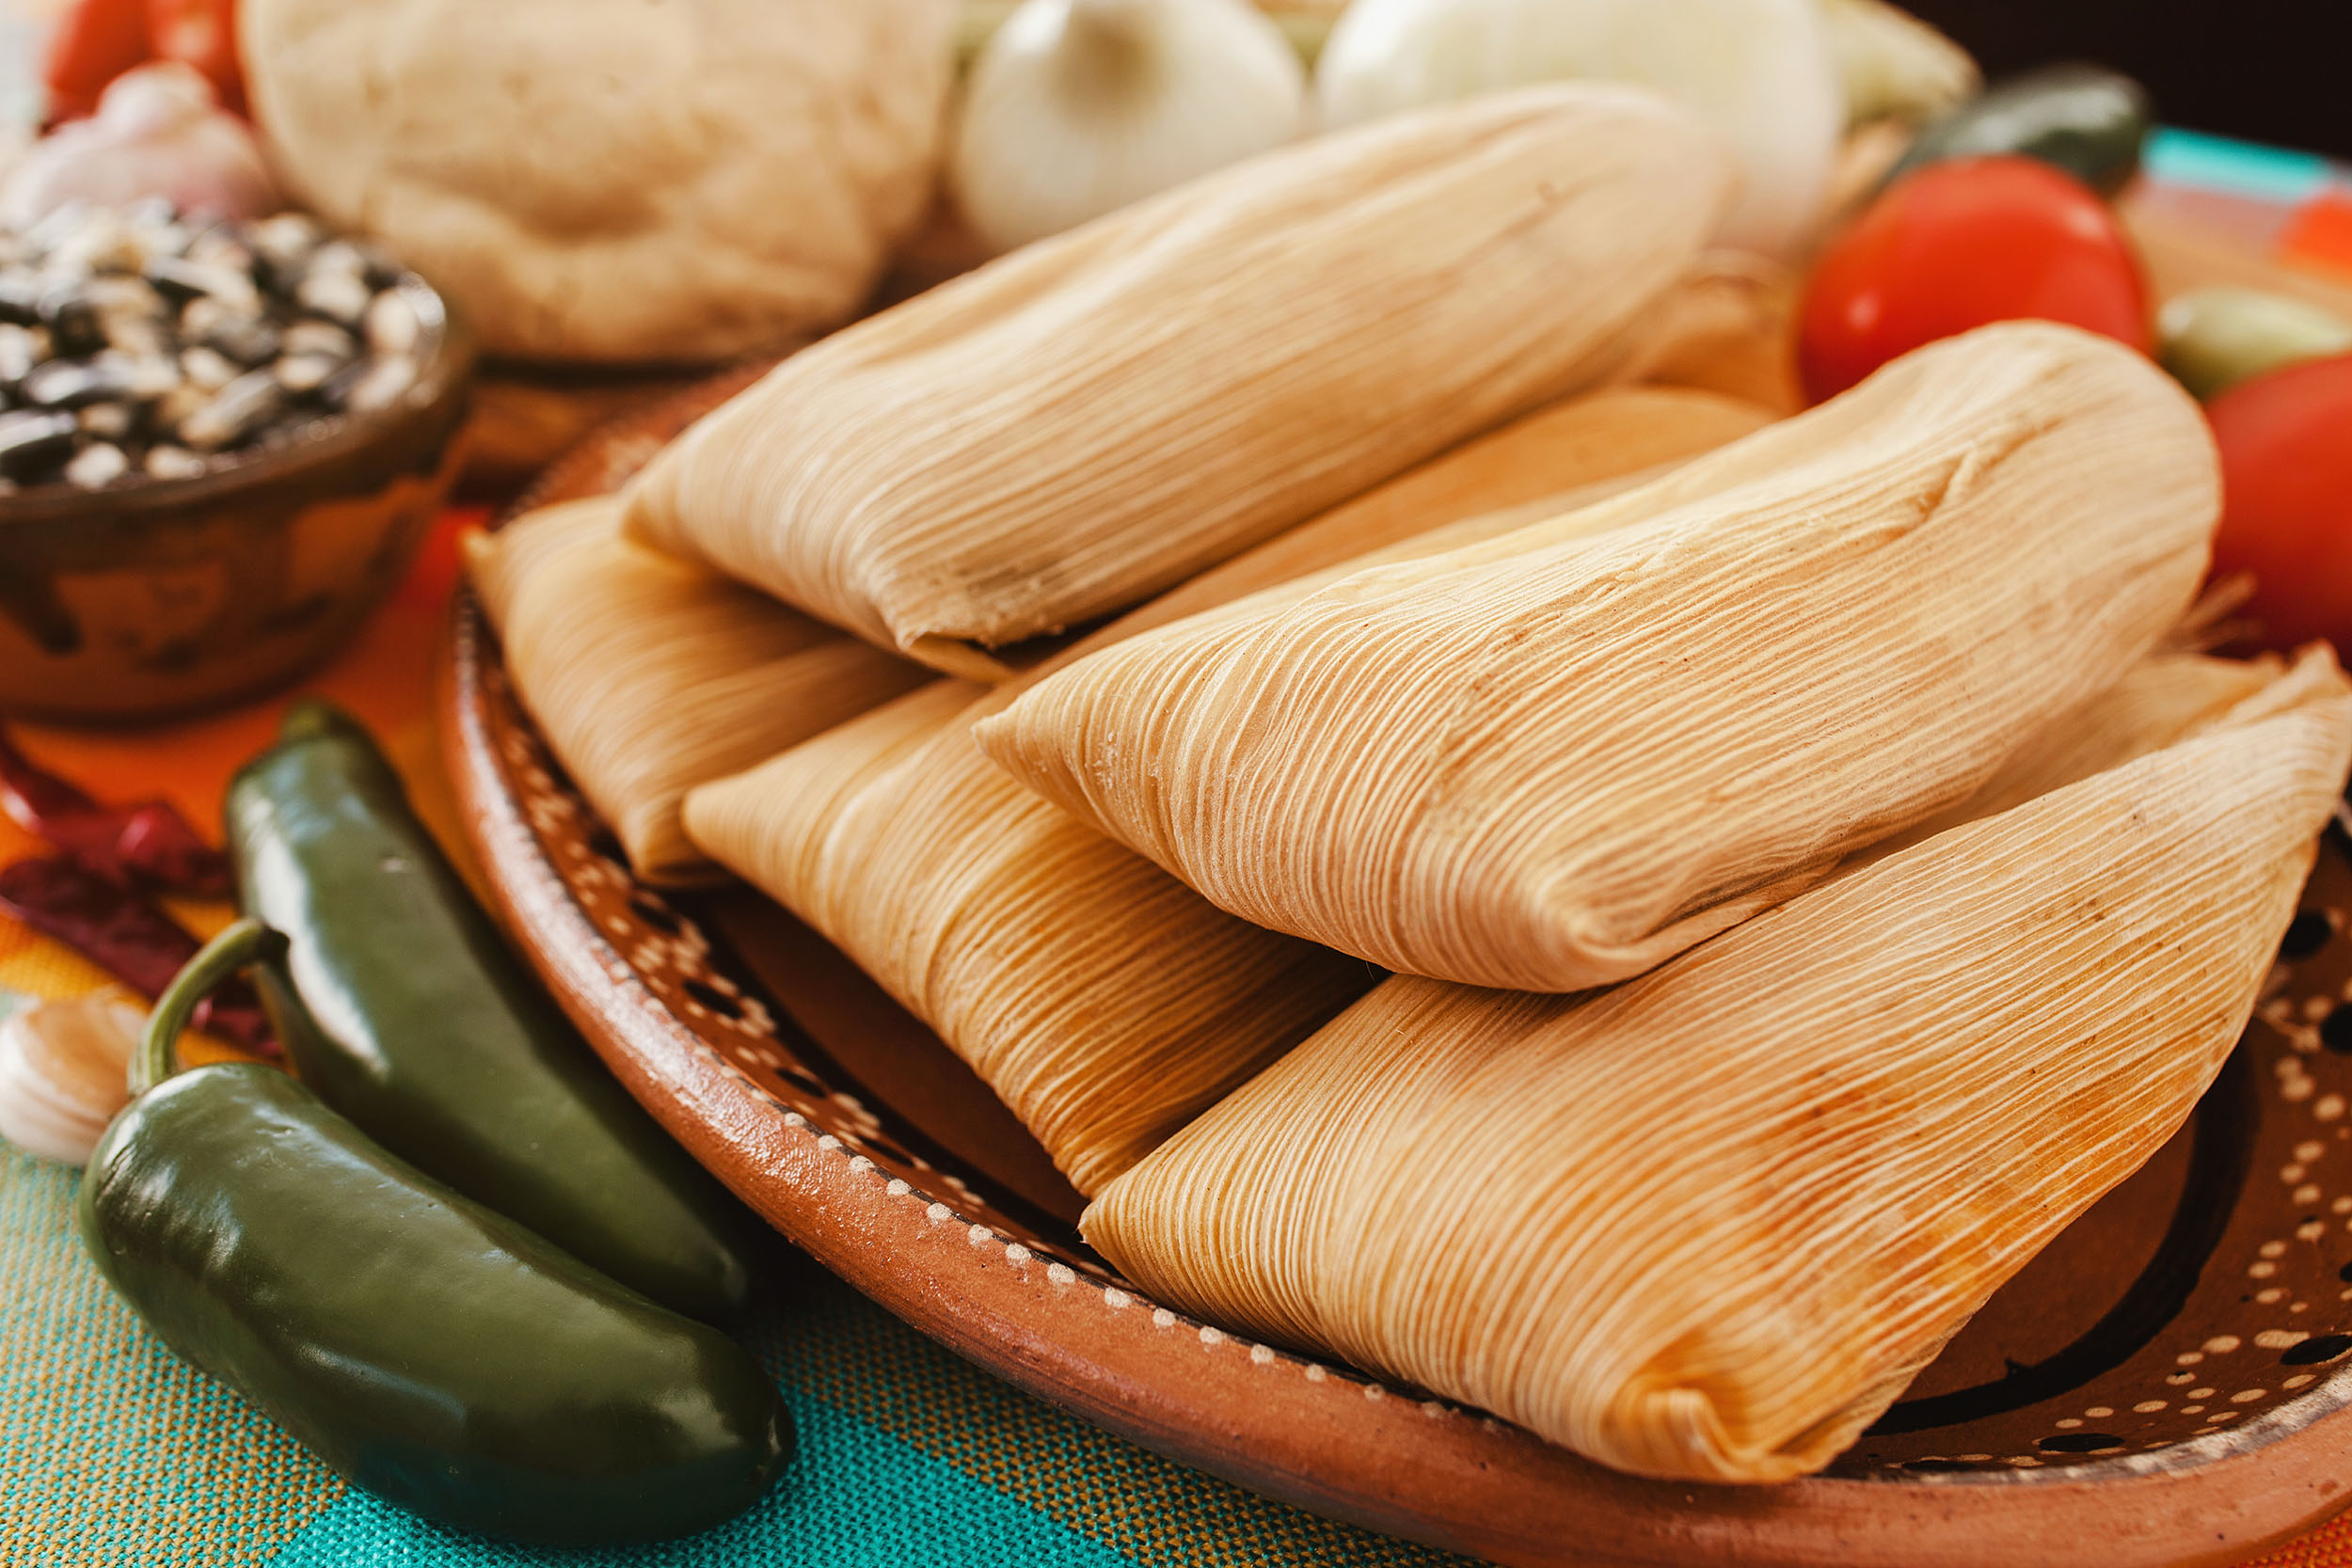  How to Reheat Tamales 5 Different Ways